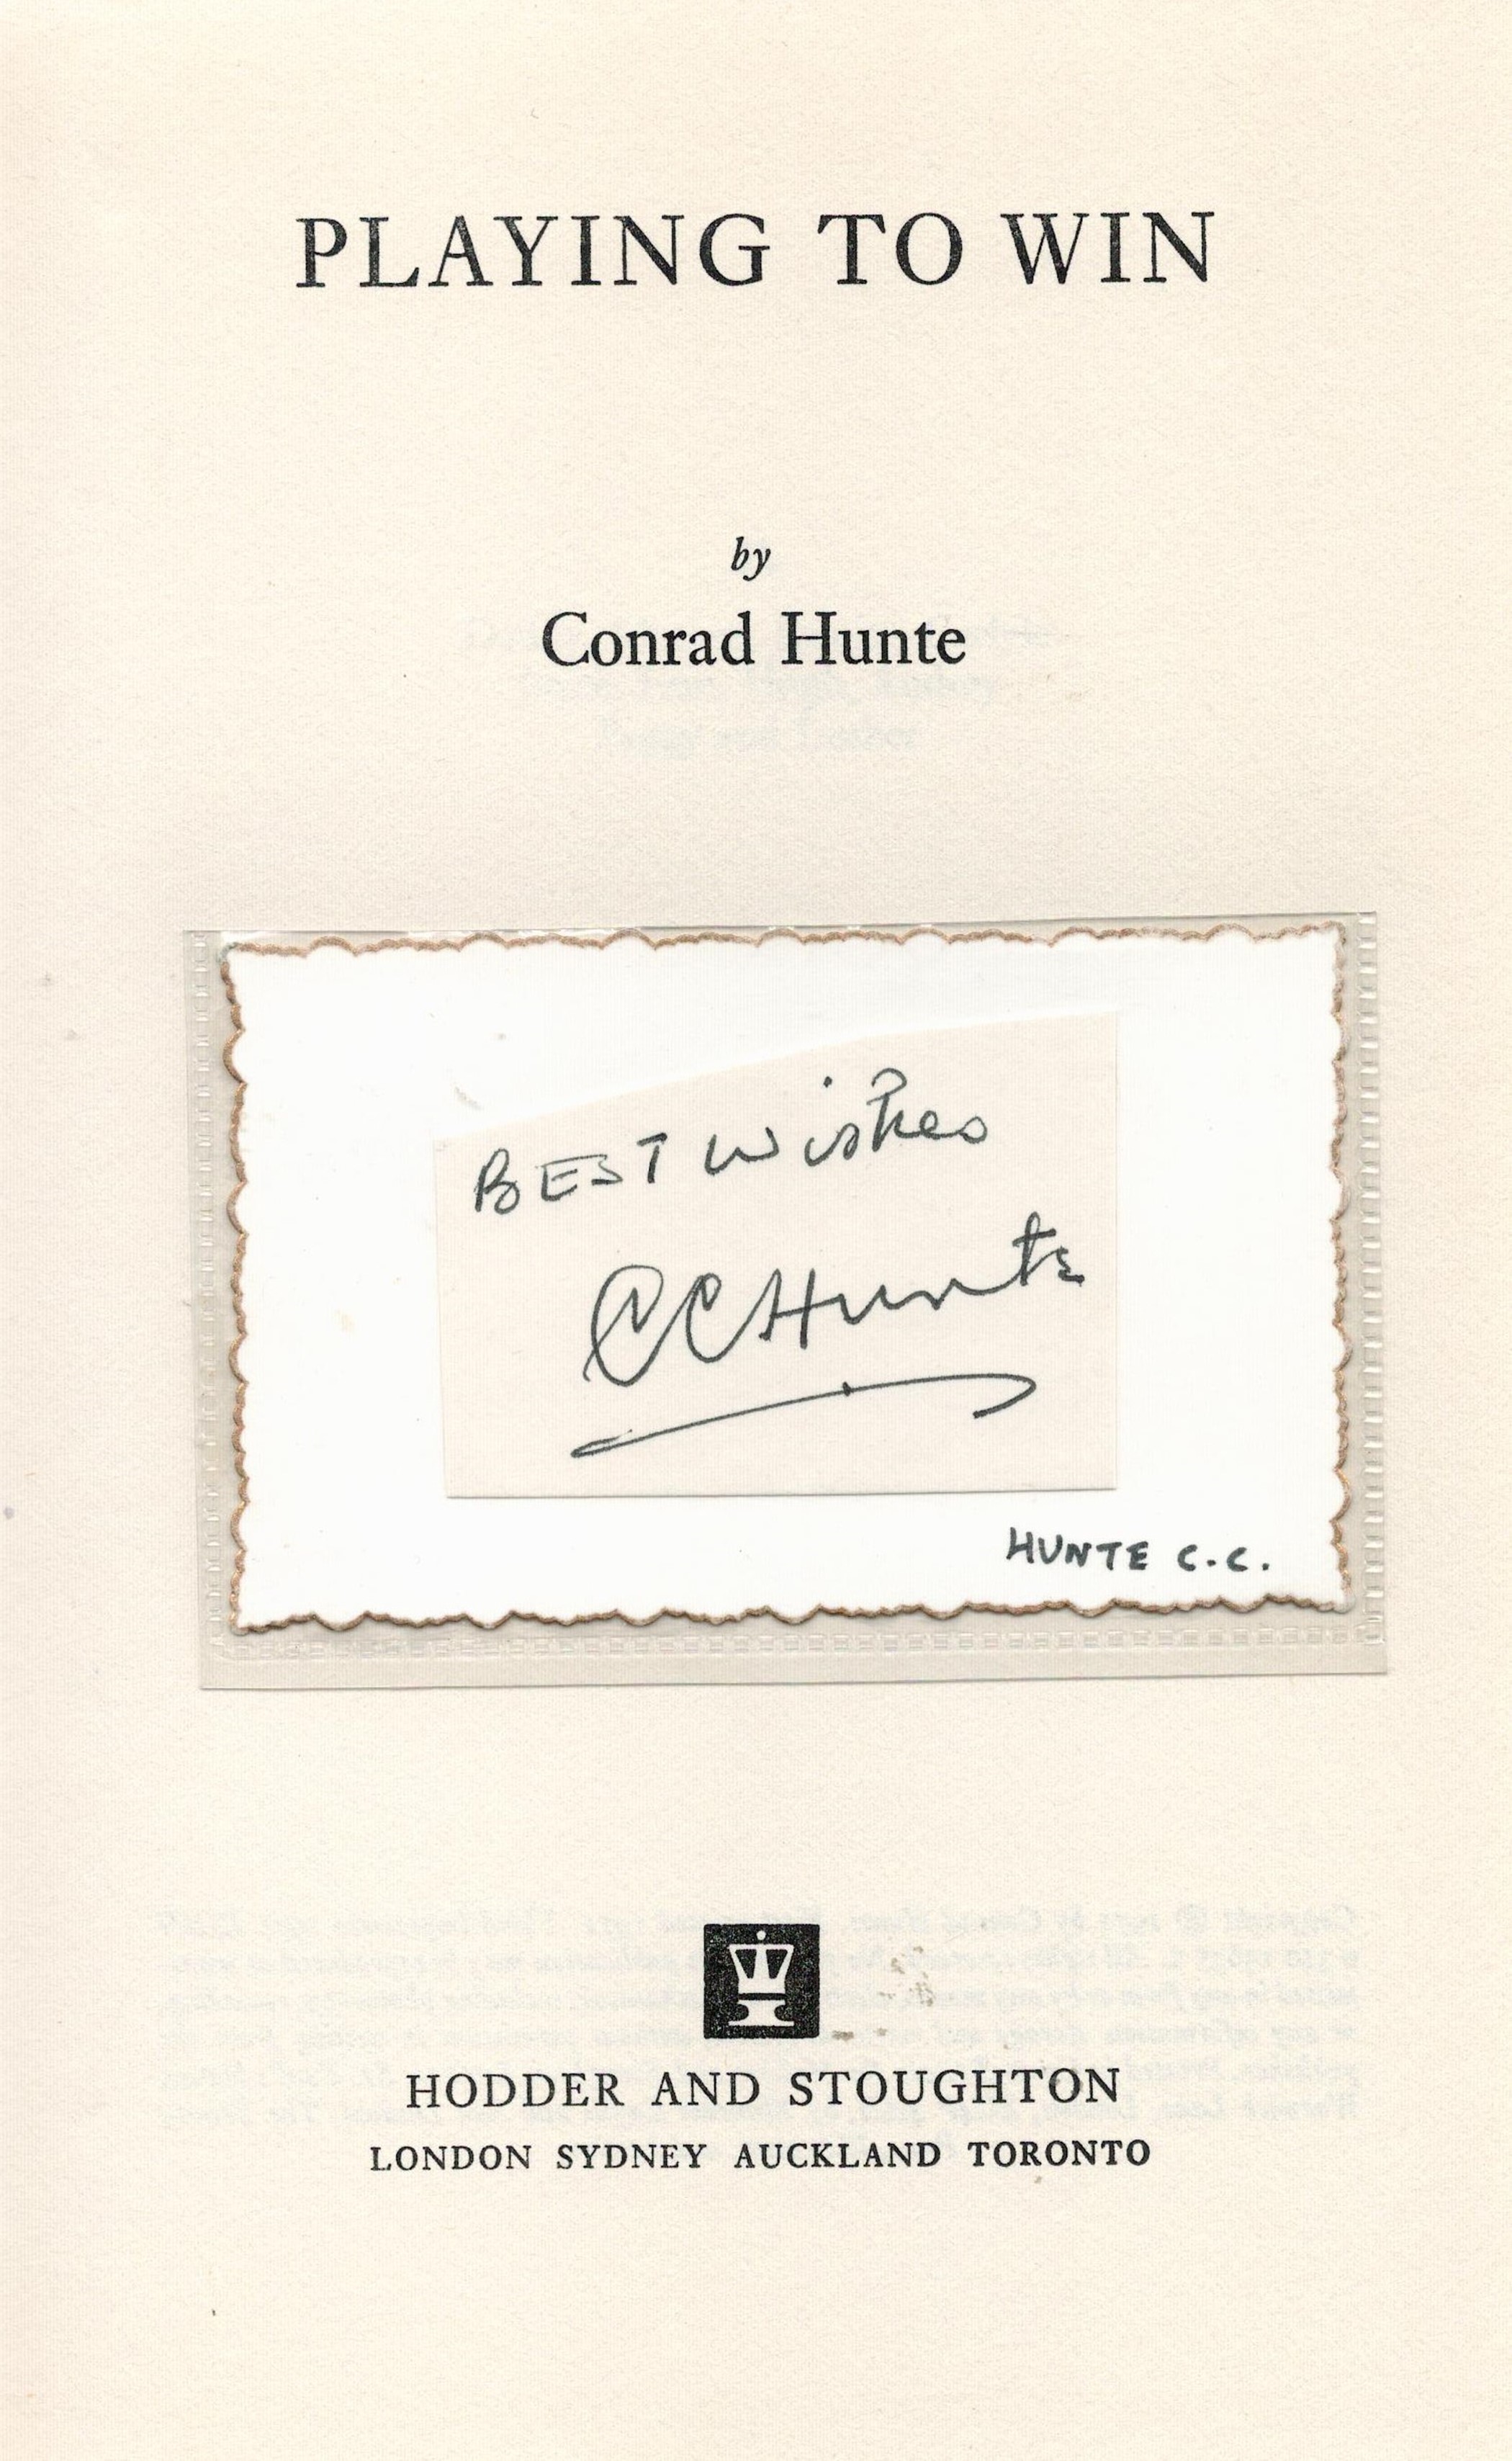 Signed Book Conrad Hunte Playing to Win Hardback Book Third Edition 1971 Signed by Conrad Hunte on - Image 3 of 4